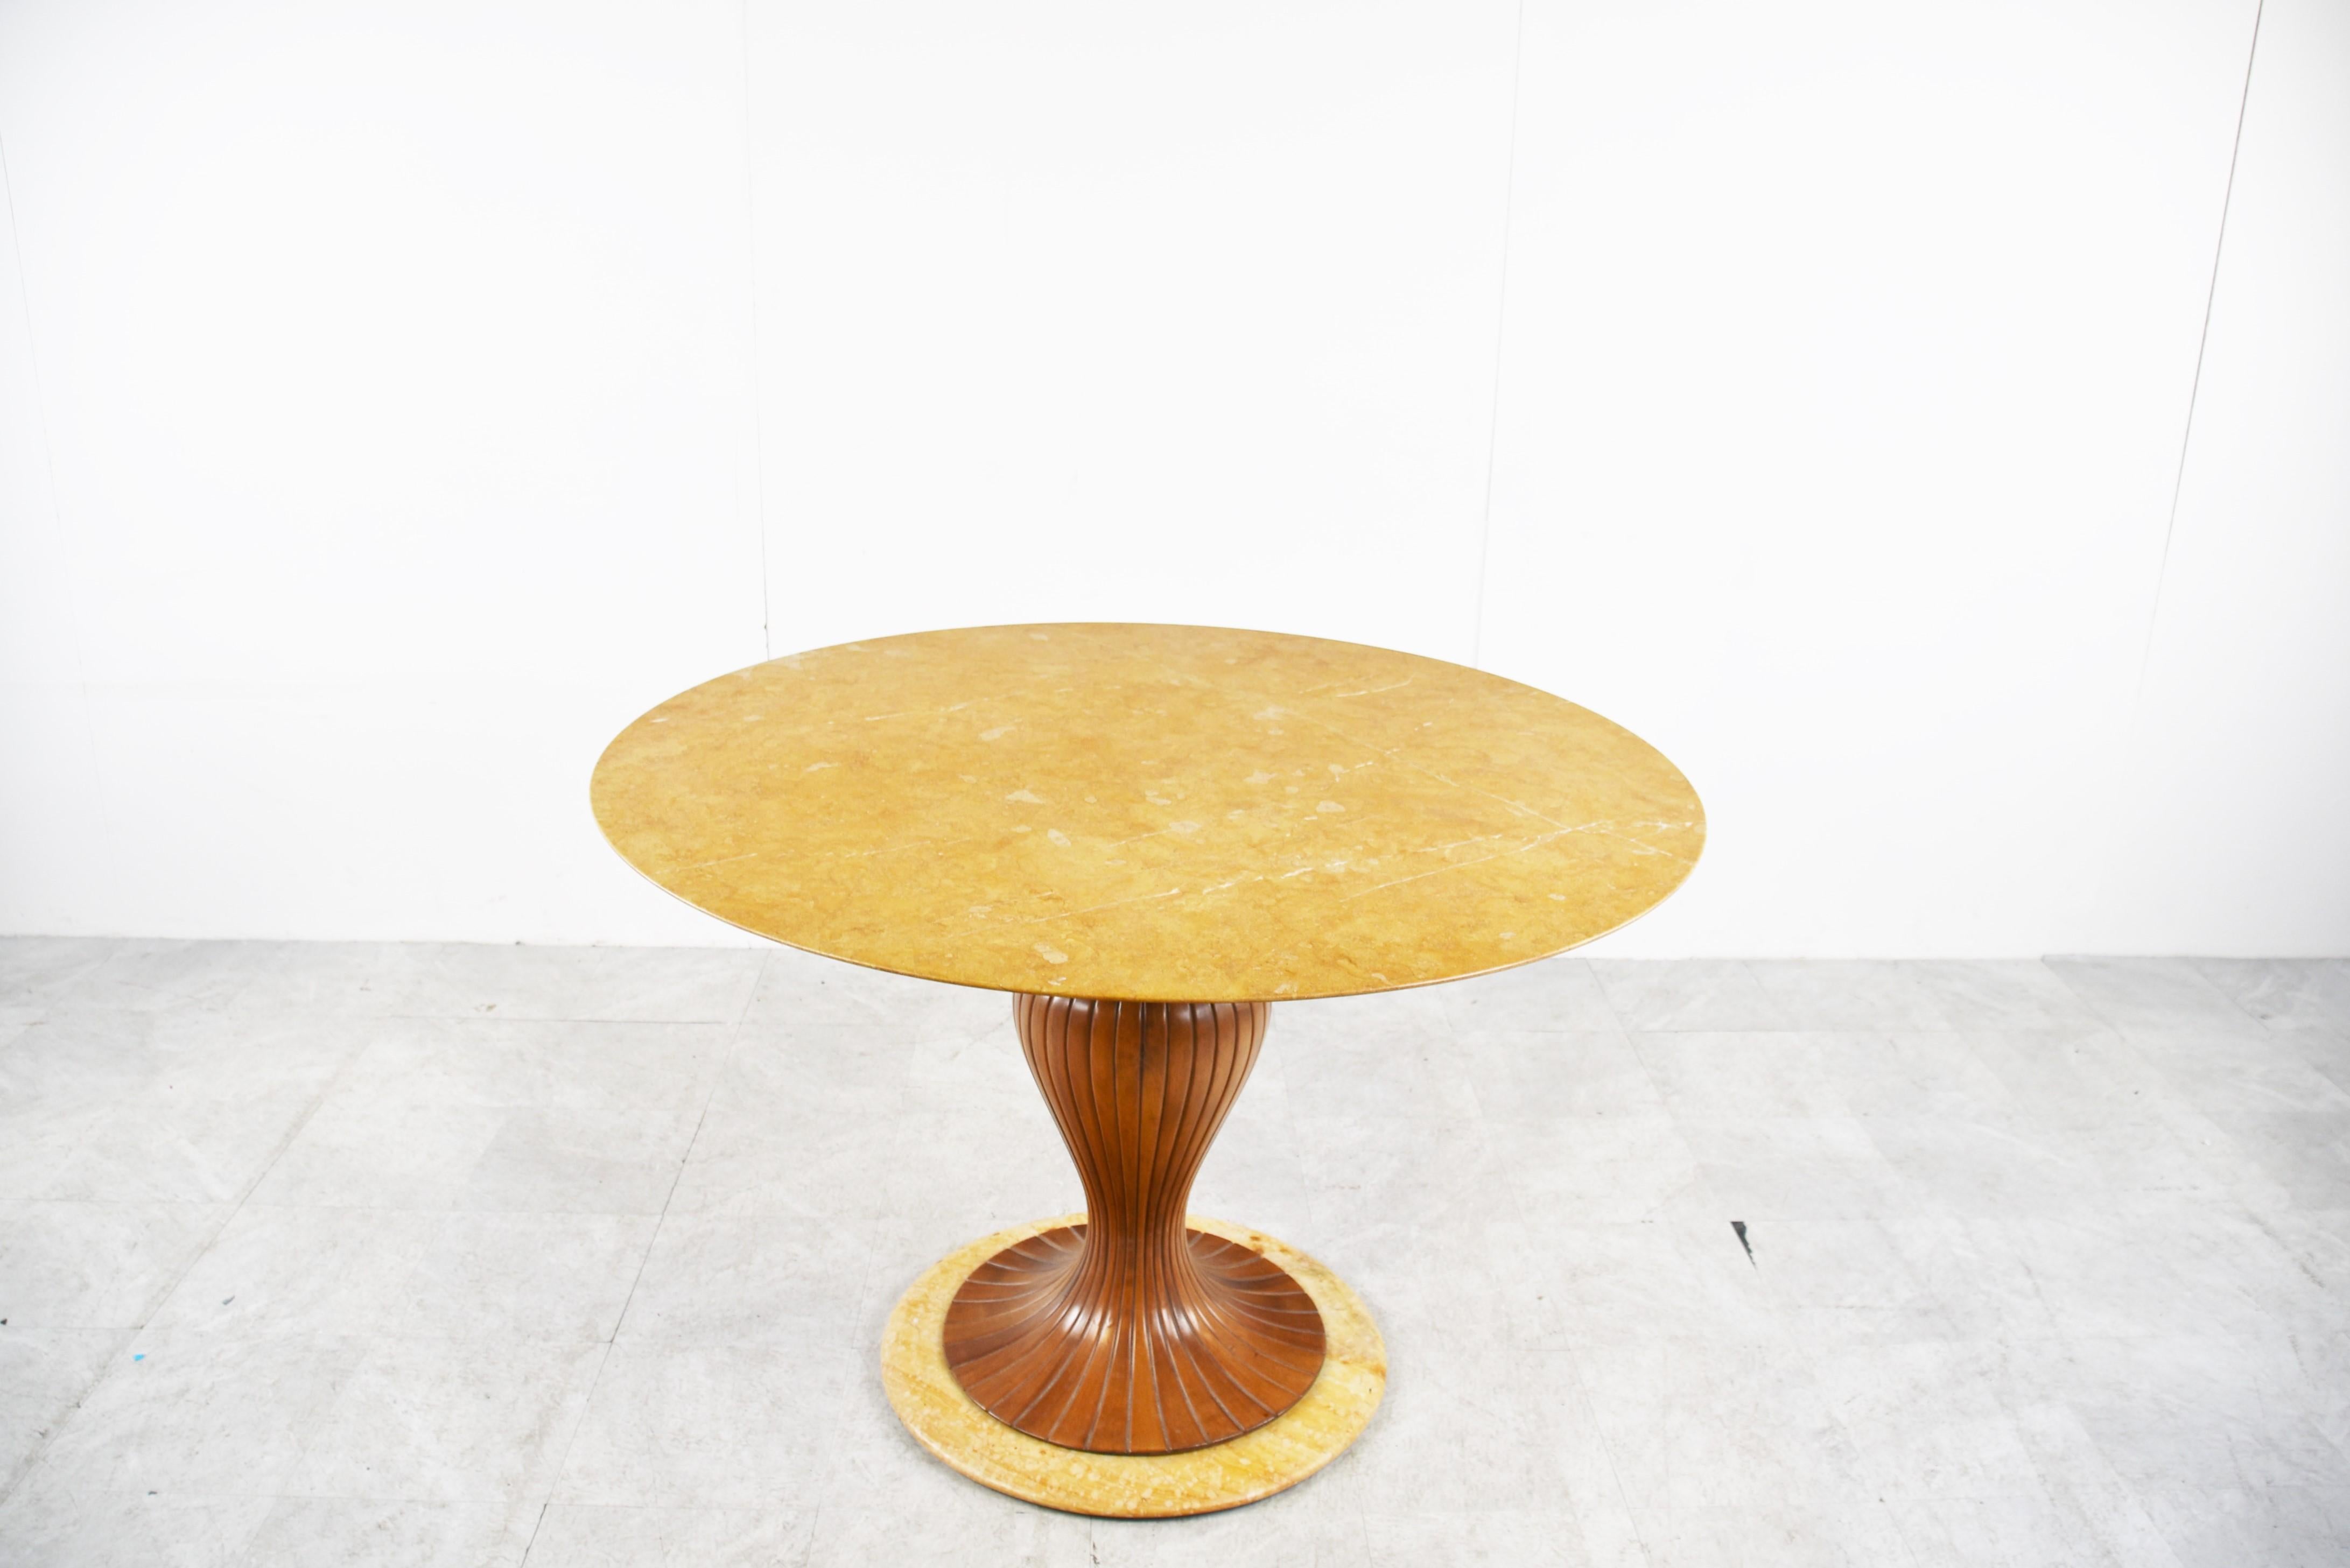 Striking mid century dining table designed by Vittorio Dassi featuring a beautiful yellow onyx table top and a base made out of a fantastic sculpted mahogany wood piece and a onyx foot.

Very elegant italian design table with a nice luxury